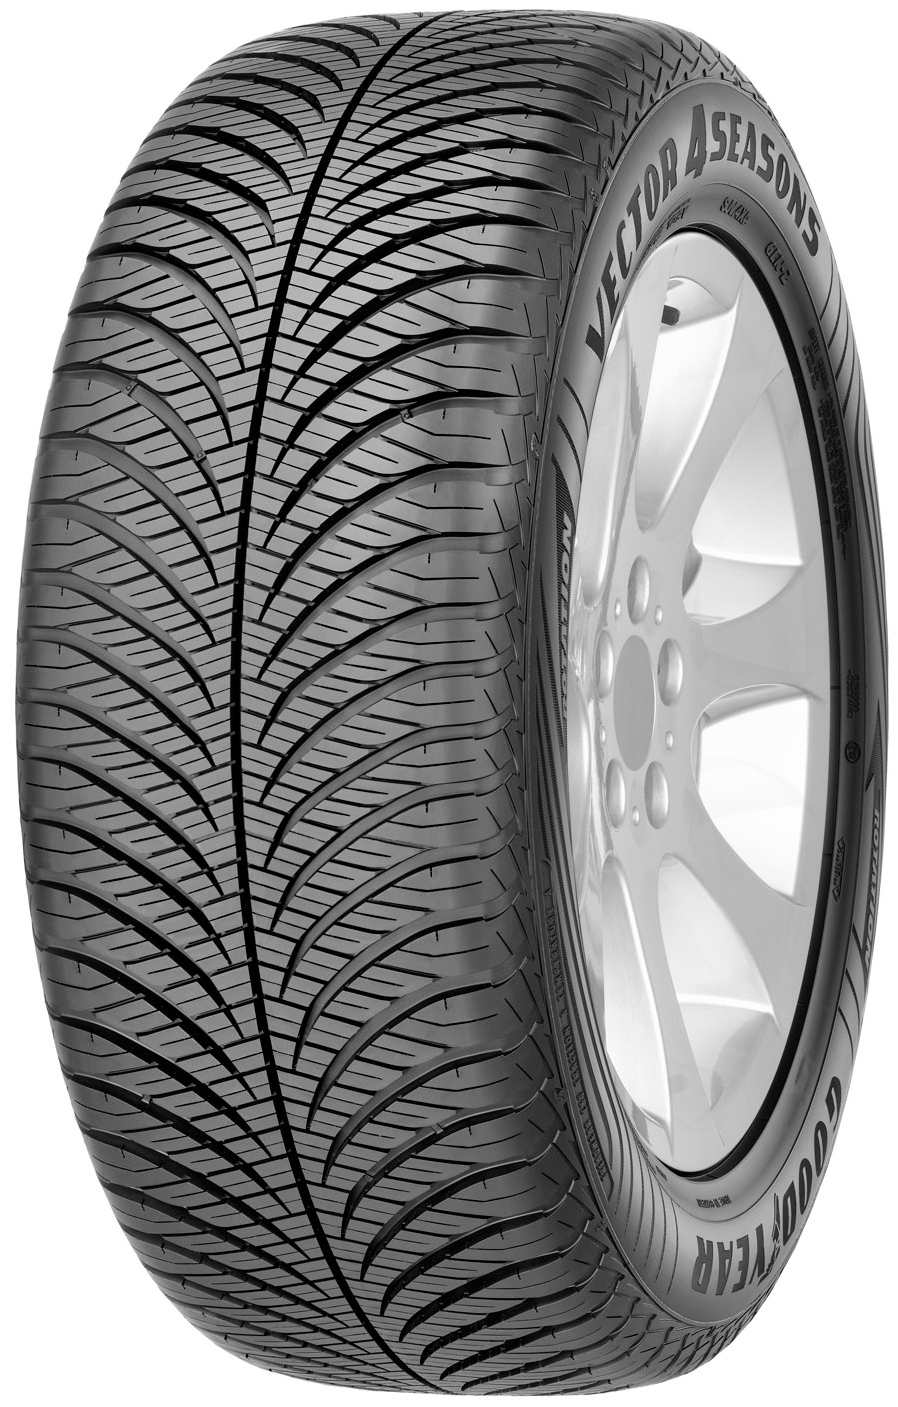 Anvelope jeep GOODYEAR VECTOR 4 S G2 SUV 255/60 R18 108V